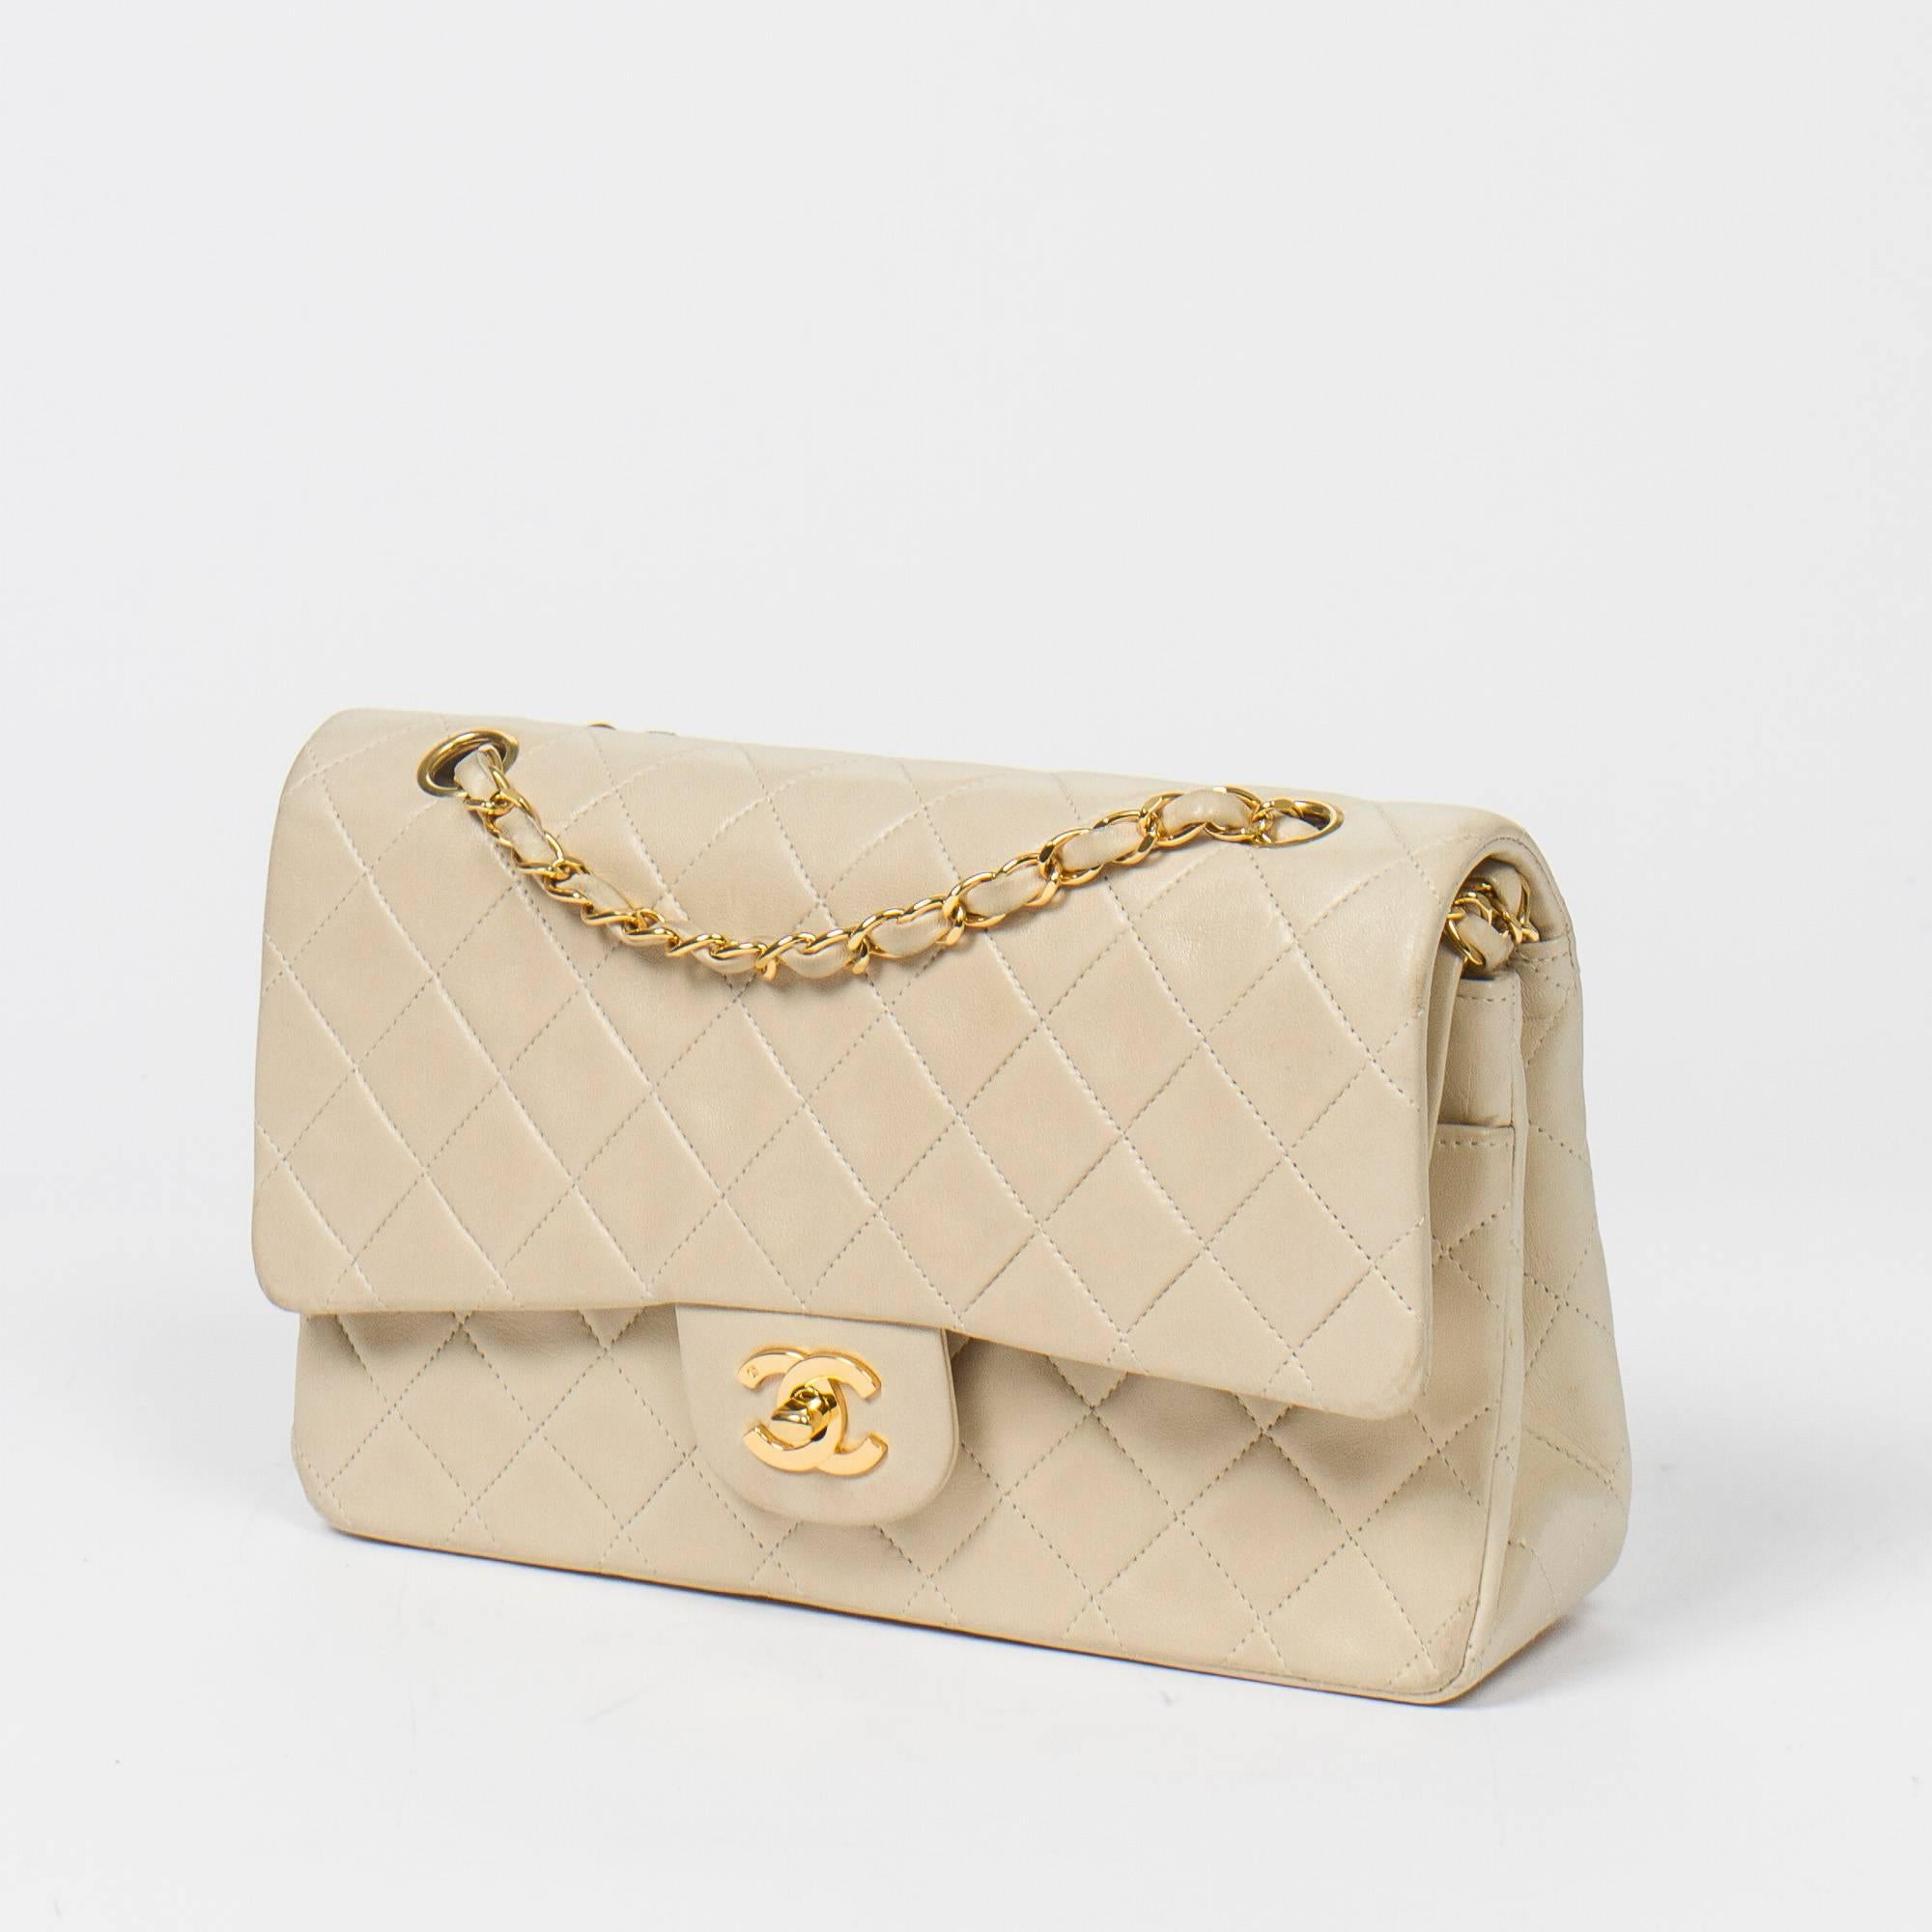 Classic Double Flap 26 in ivory quilted lambskin, double chain strap interlaced with leather, signature turnlock closure, gold tone hardware. Back slip pocket. Ivory leather lined interior with 3 slip pockets. Gold tone heat stamp 